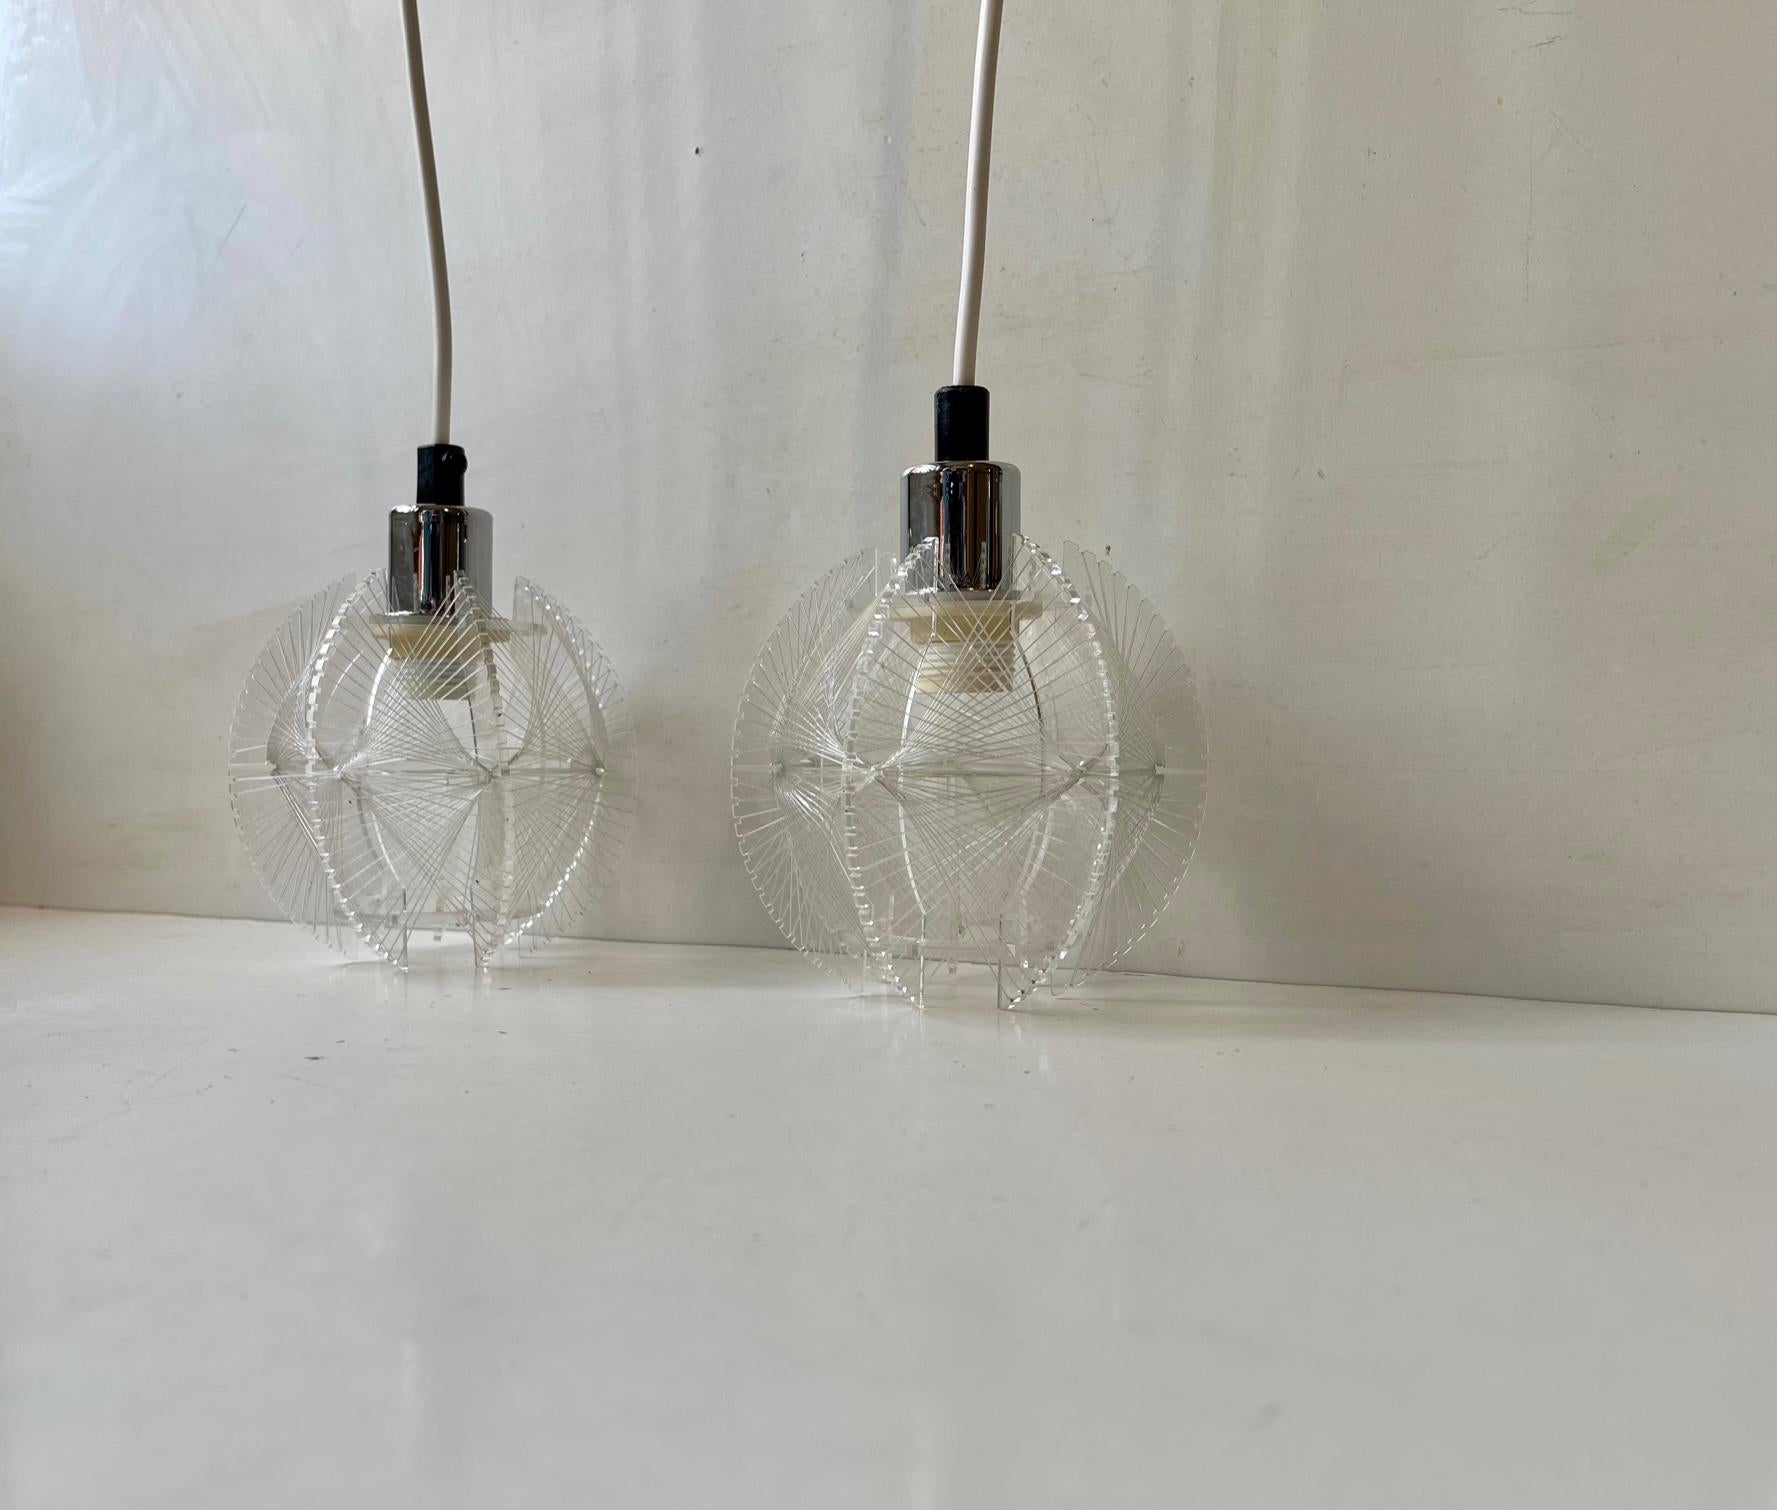 Modernist Lucite & String Ceiling Lamps by Paul Secon for Sompex, Germany, 1970s In Good Condition For Sale In Esbjerg, DK